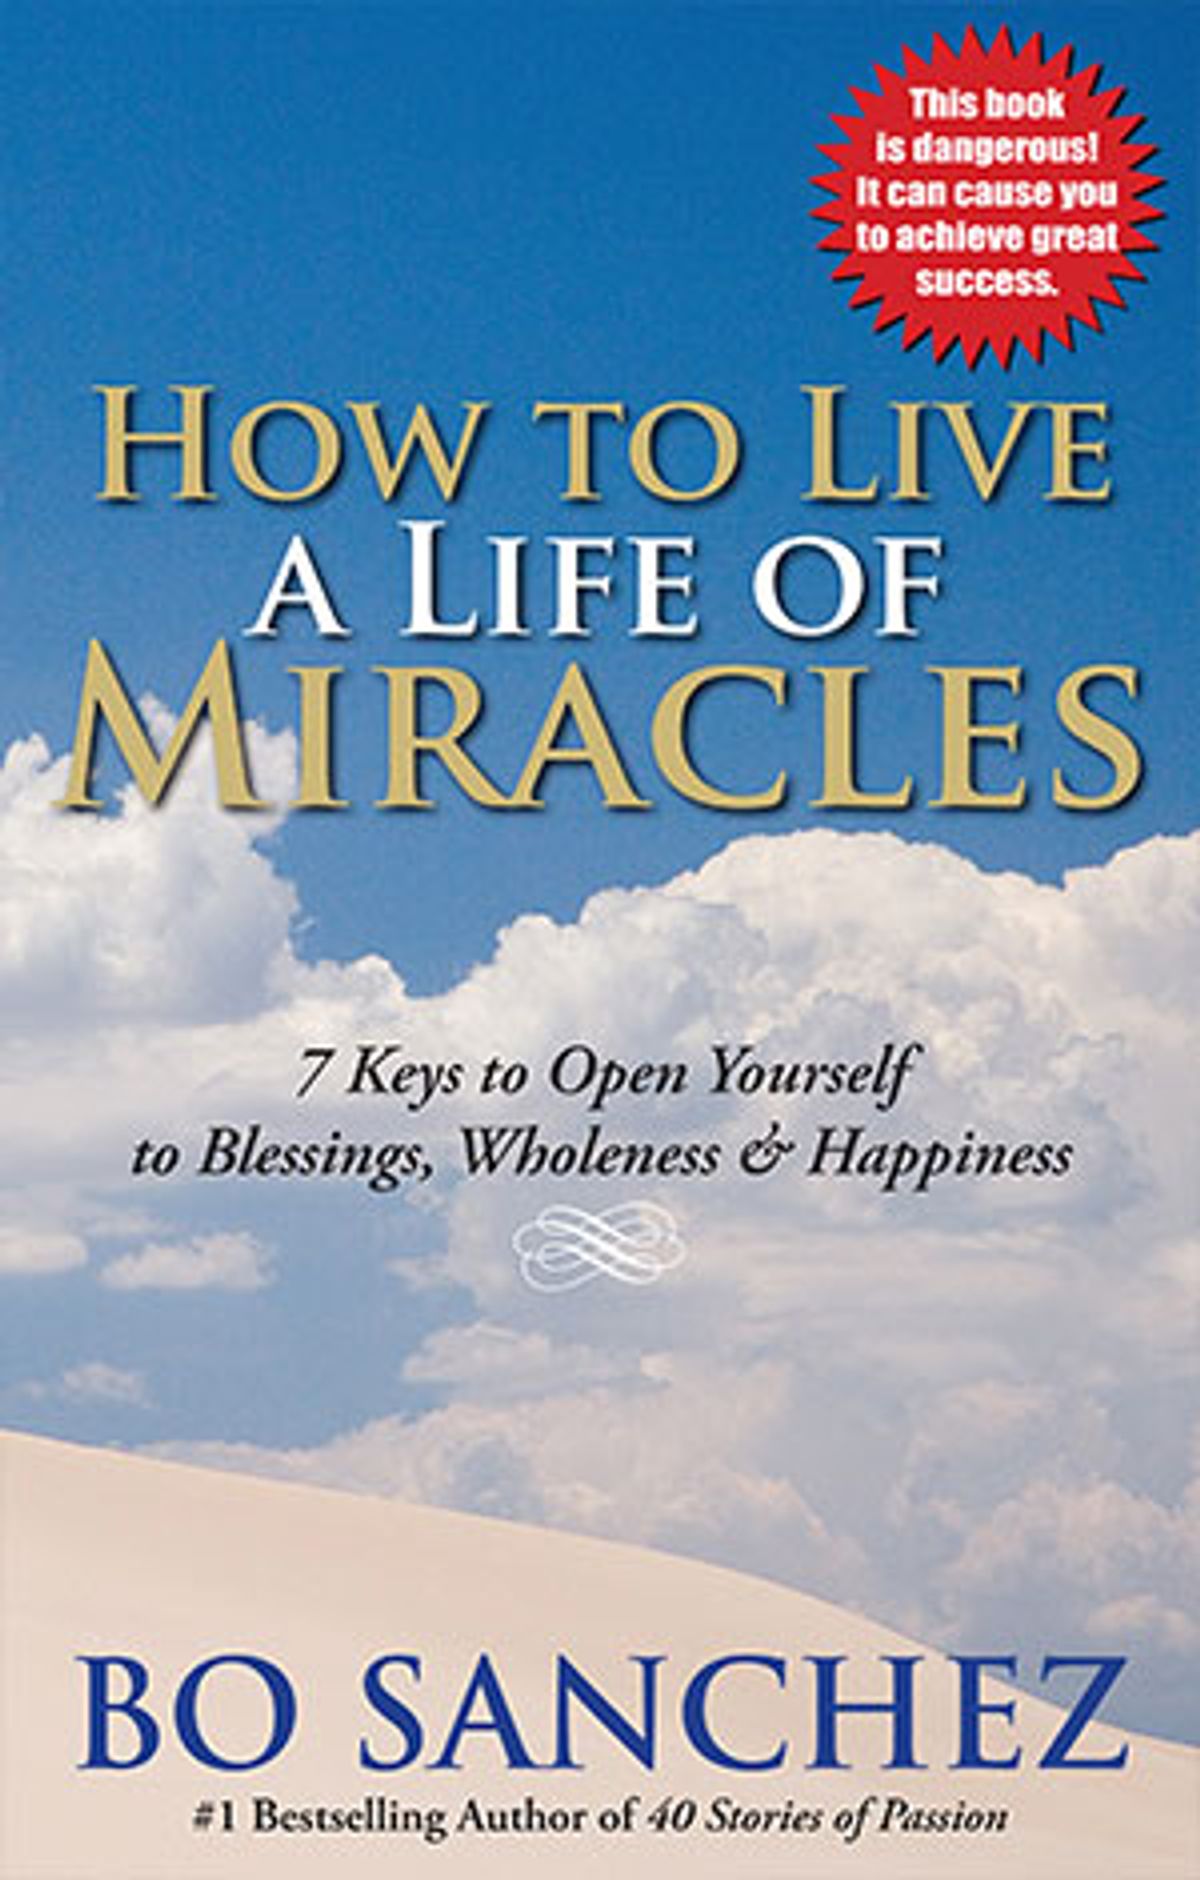 How to Live a Life of Miracles by Bo Sanchez